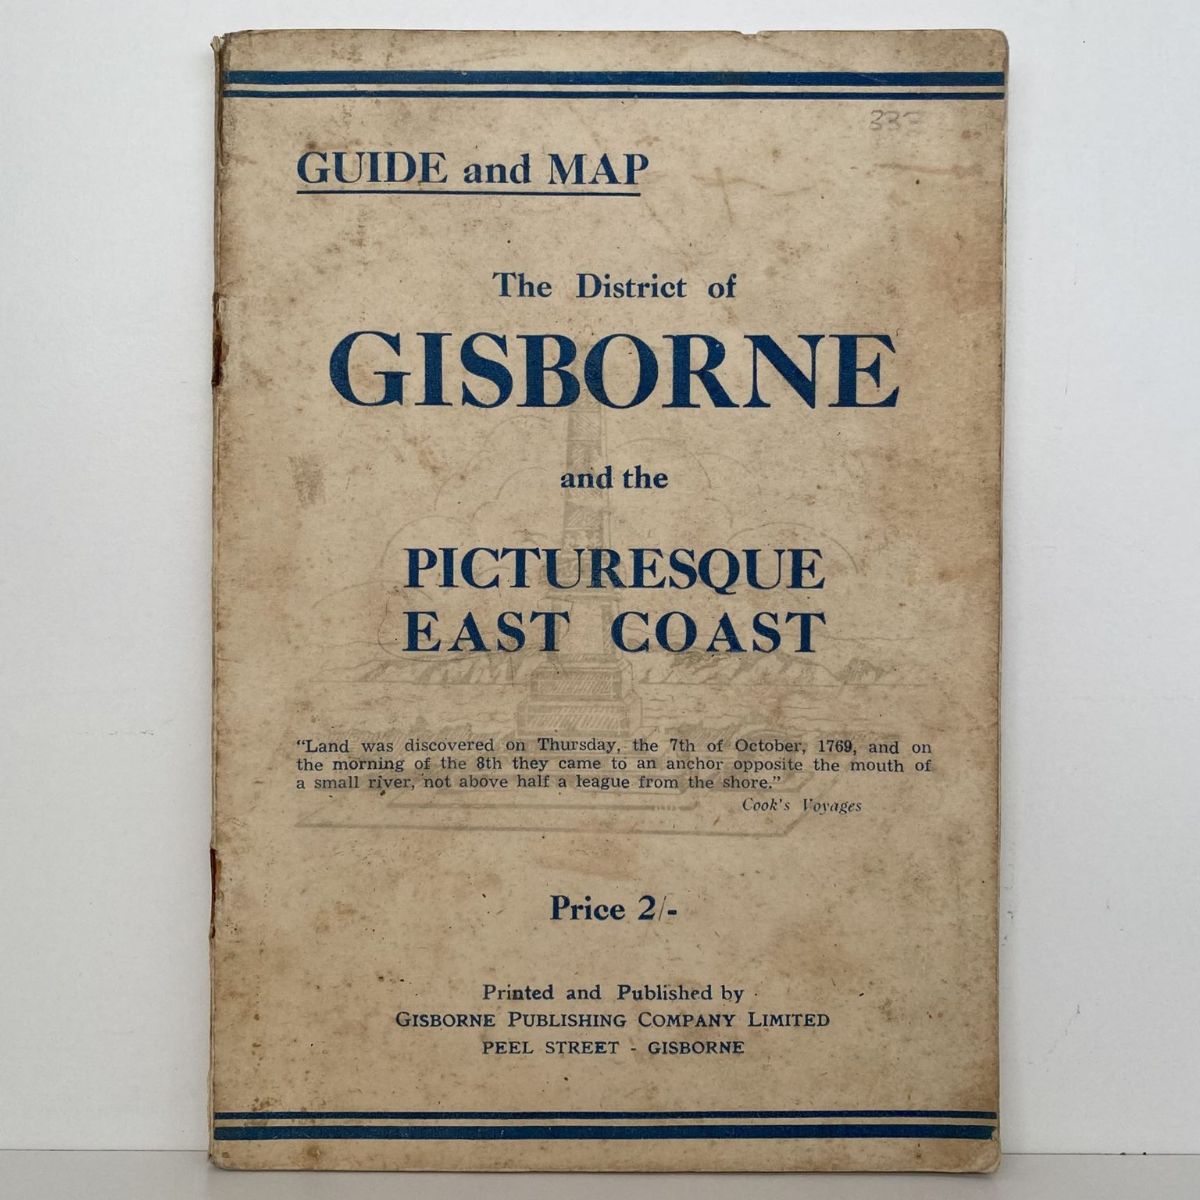 The District of GISBORNE: Guide and Map to the Picturesque EAST COAST